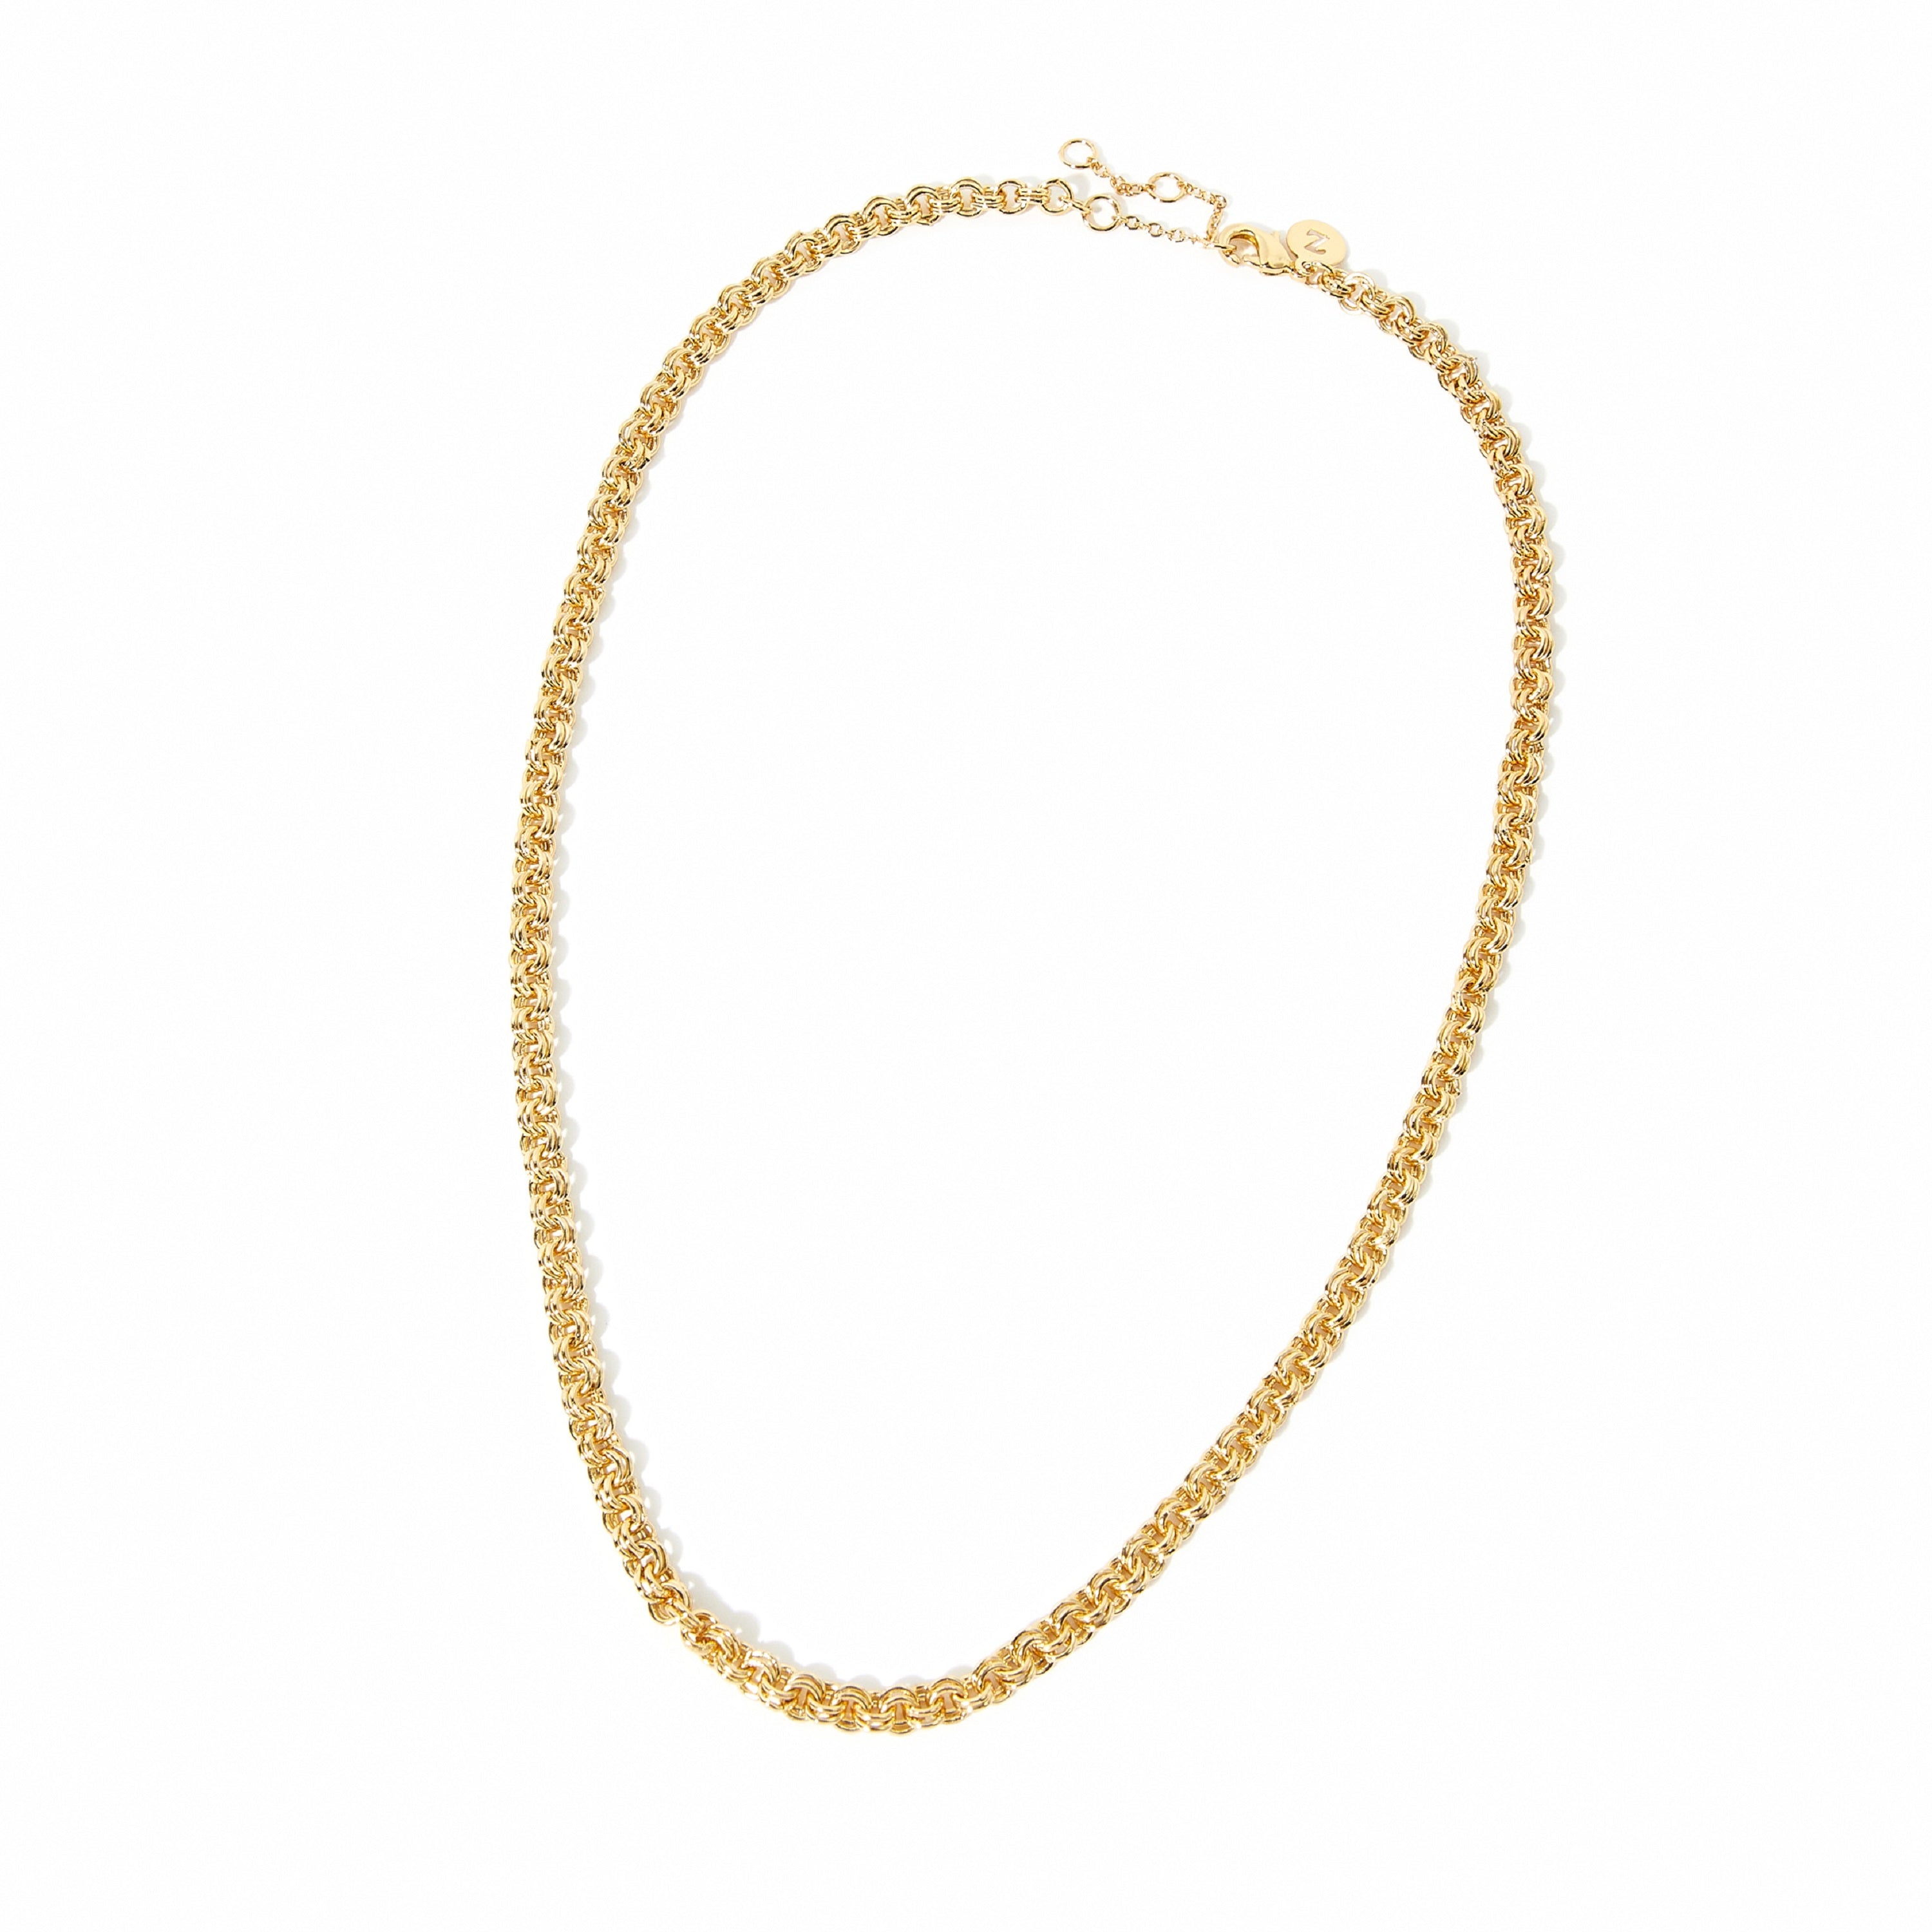 Real Gold Plated Limited Rolo Chain Necklace For Women By Accessorize London